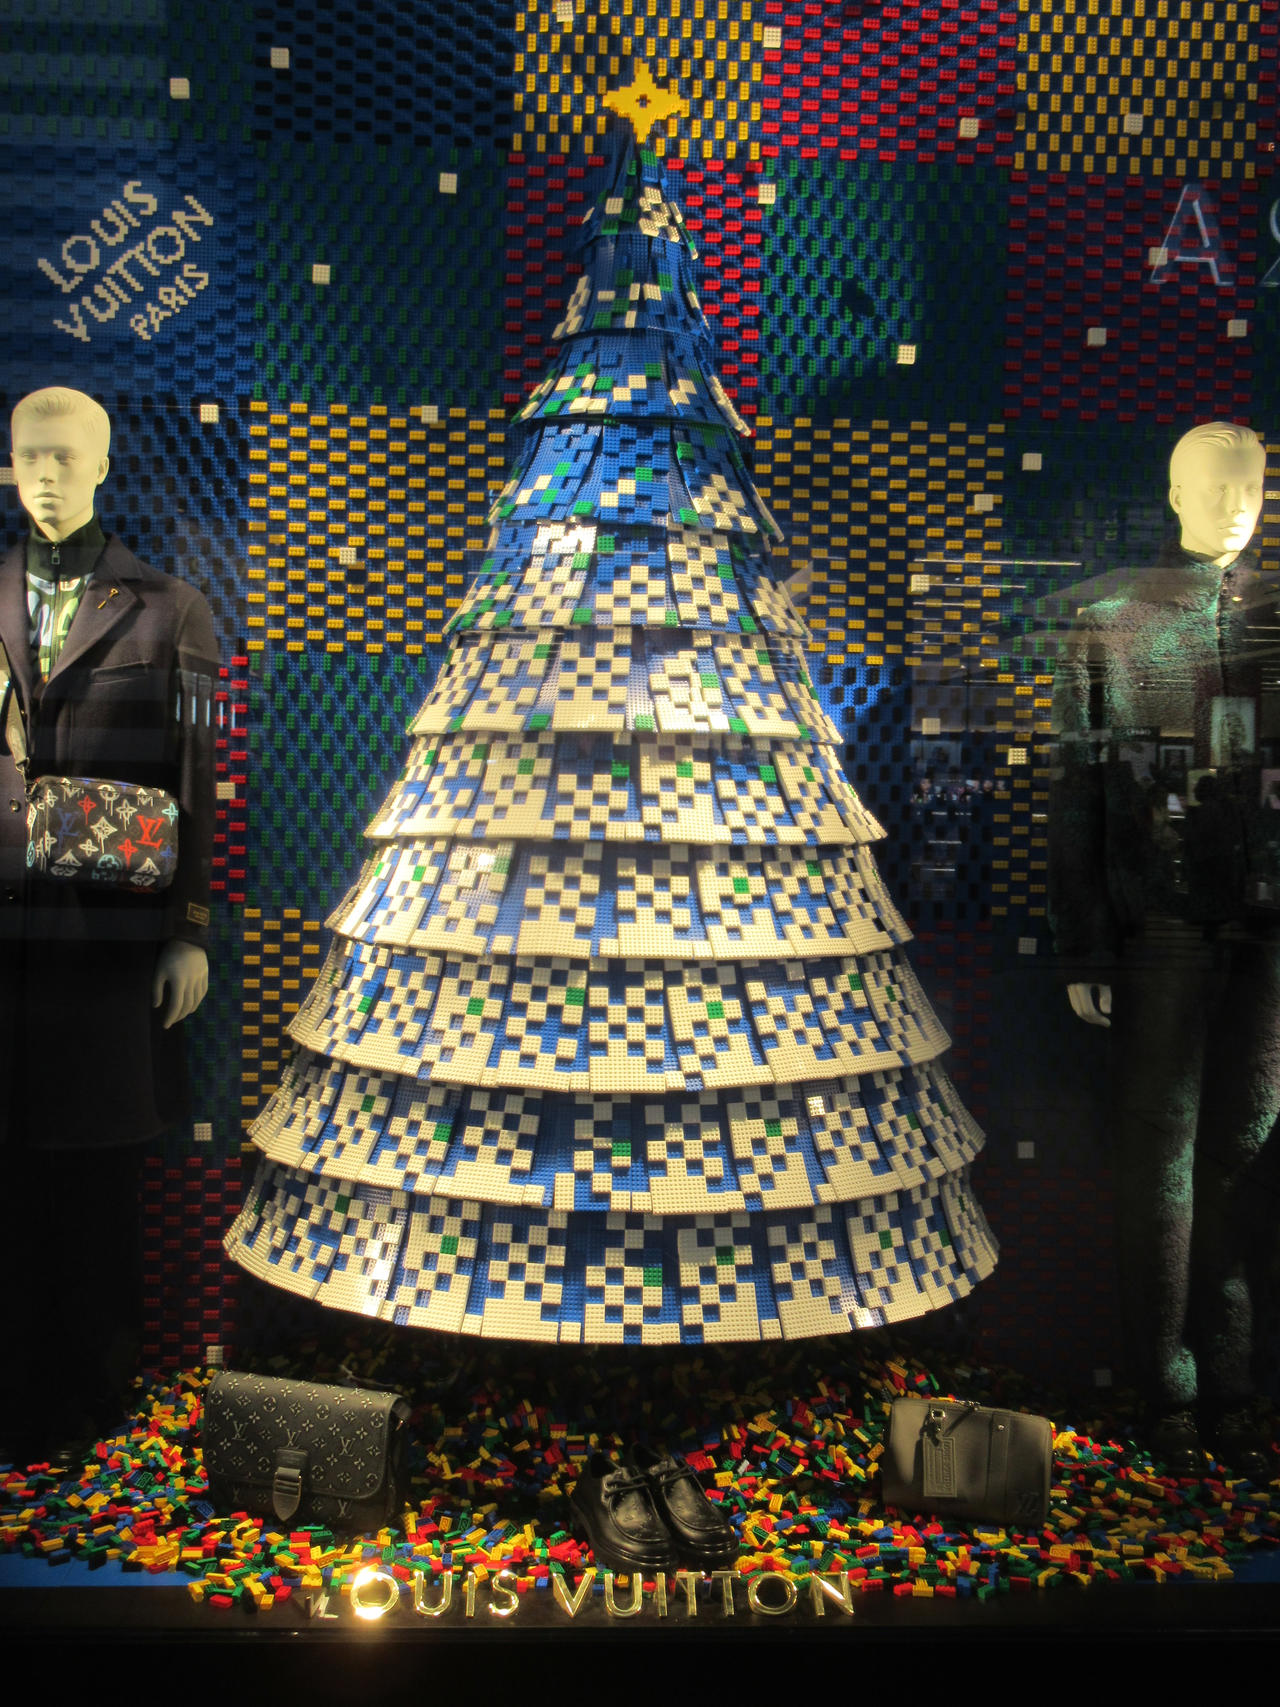 Louis Vuitton Lits Up Its Tallest Christmas Tree in Greenbelt